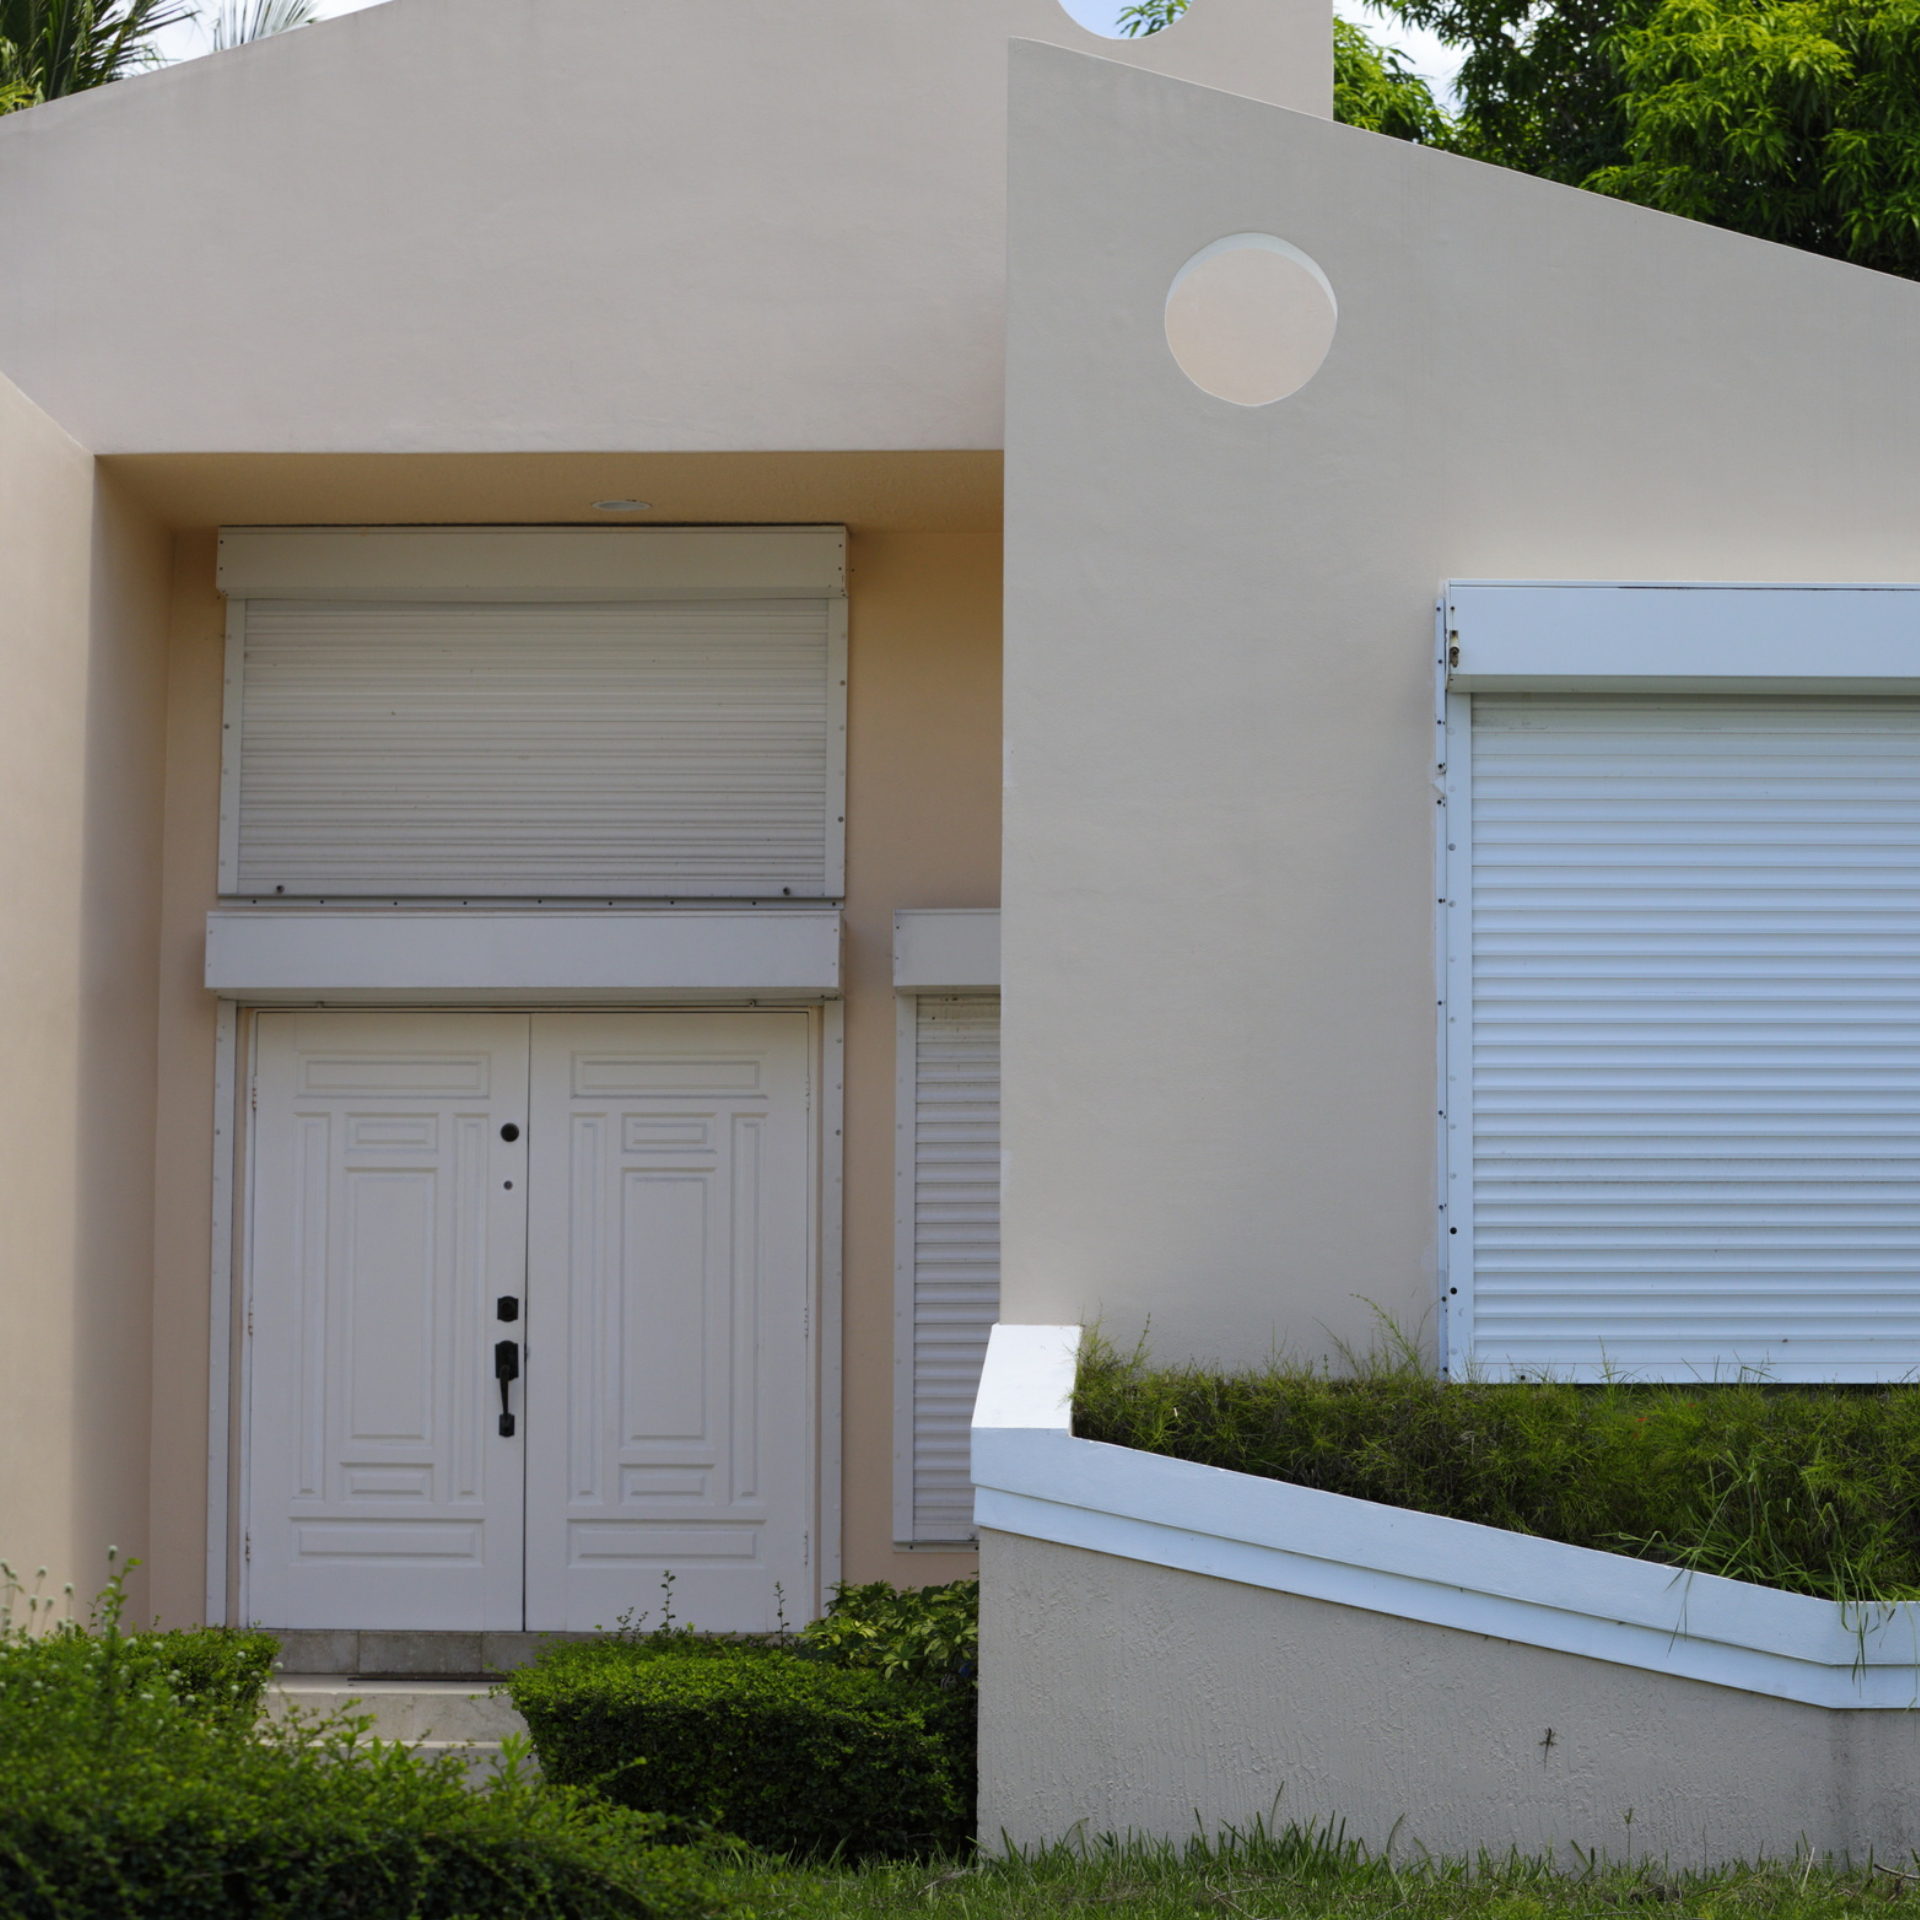 Replace bulky and limiting roll down shutters